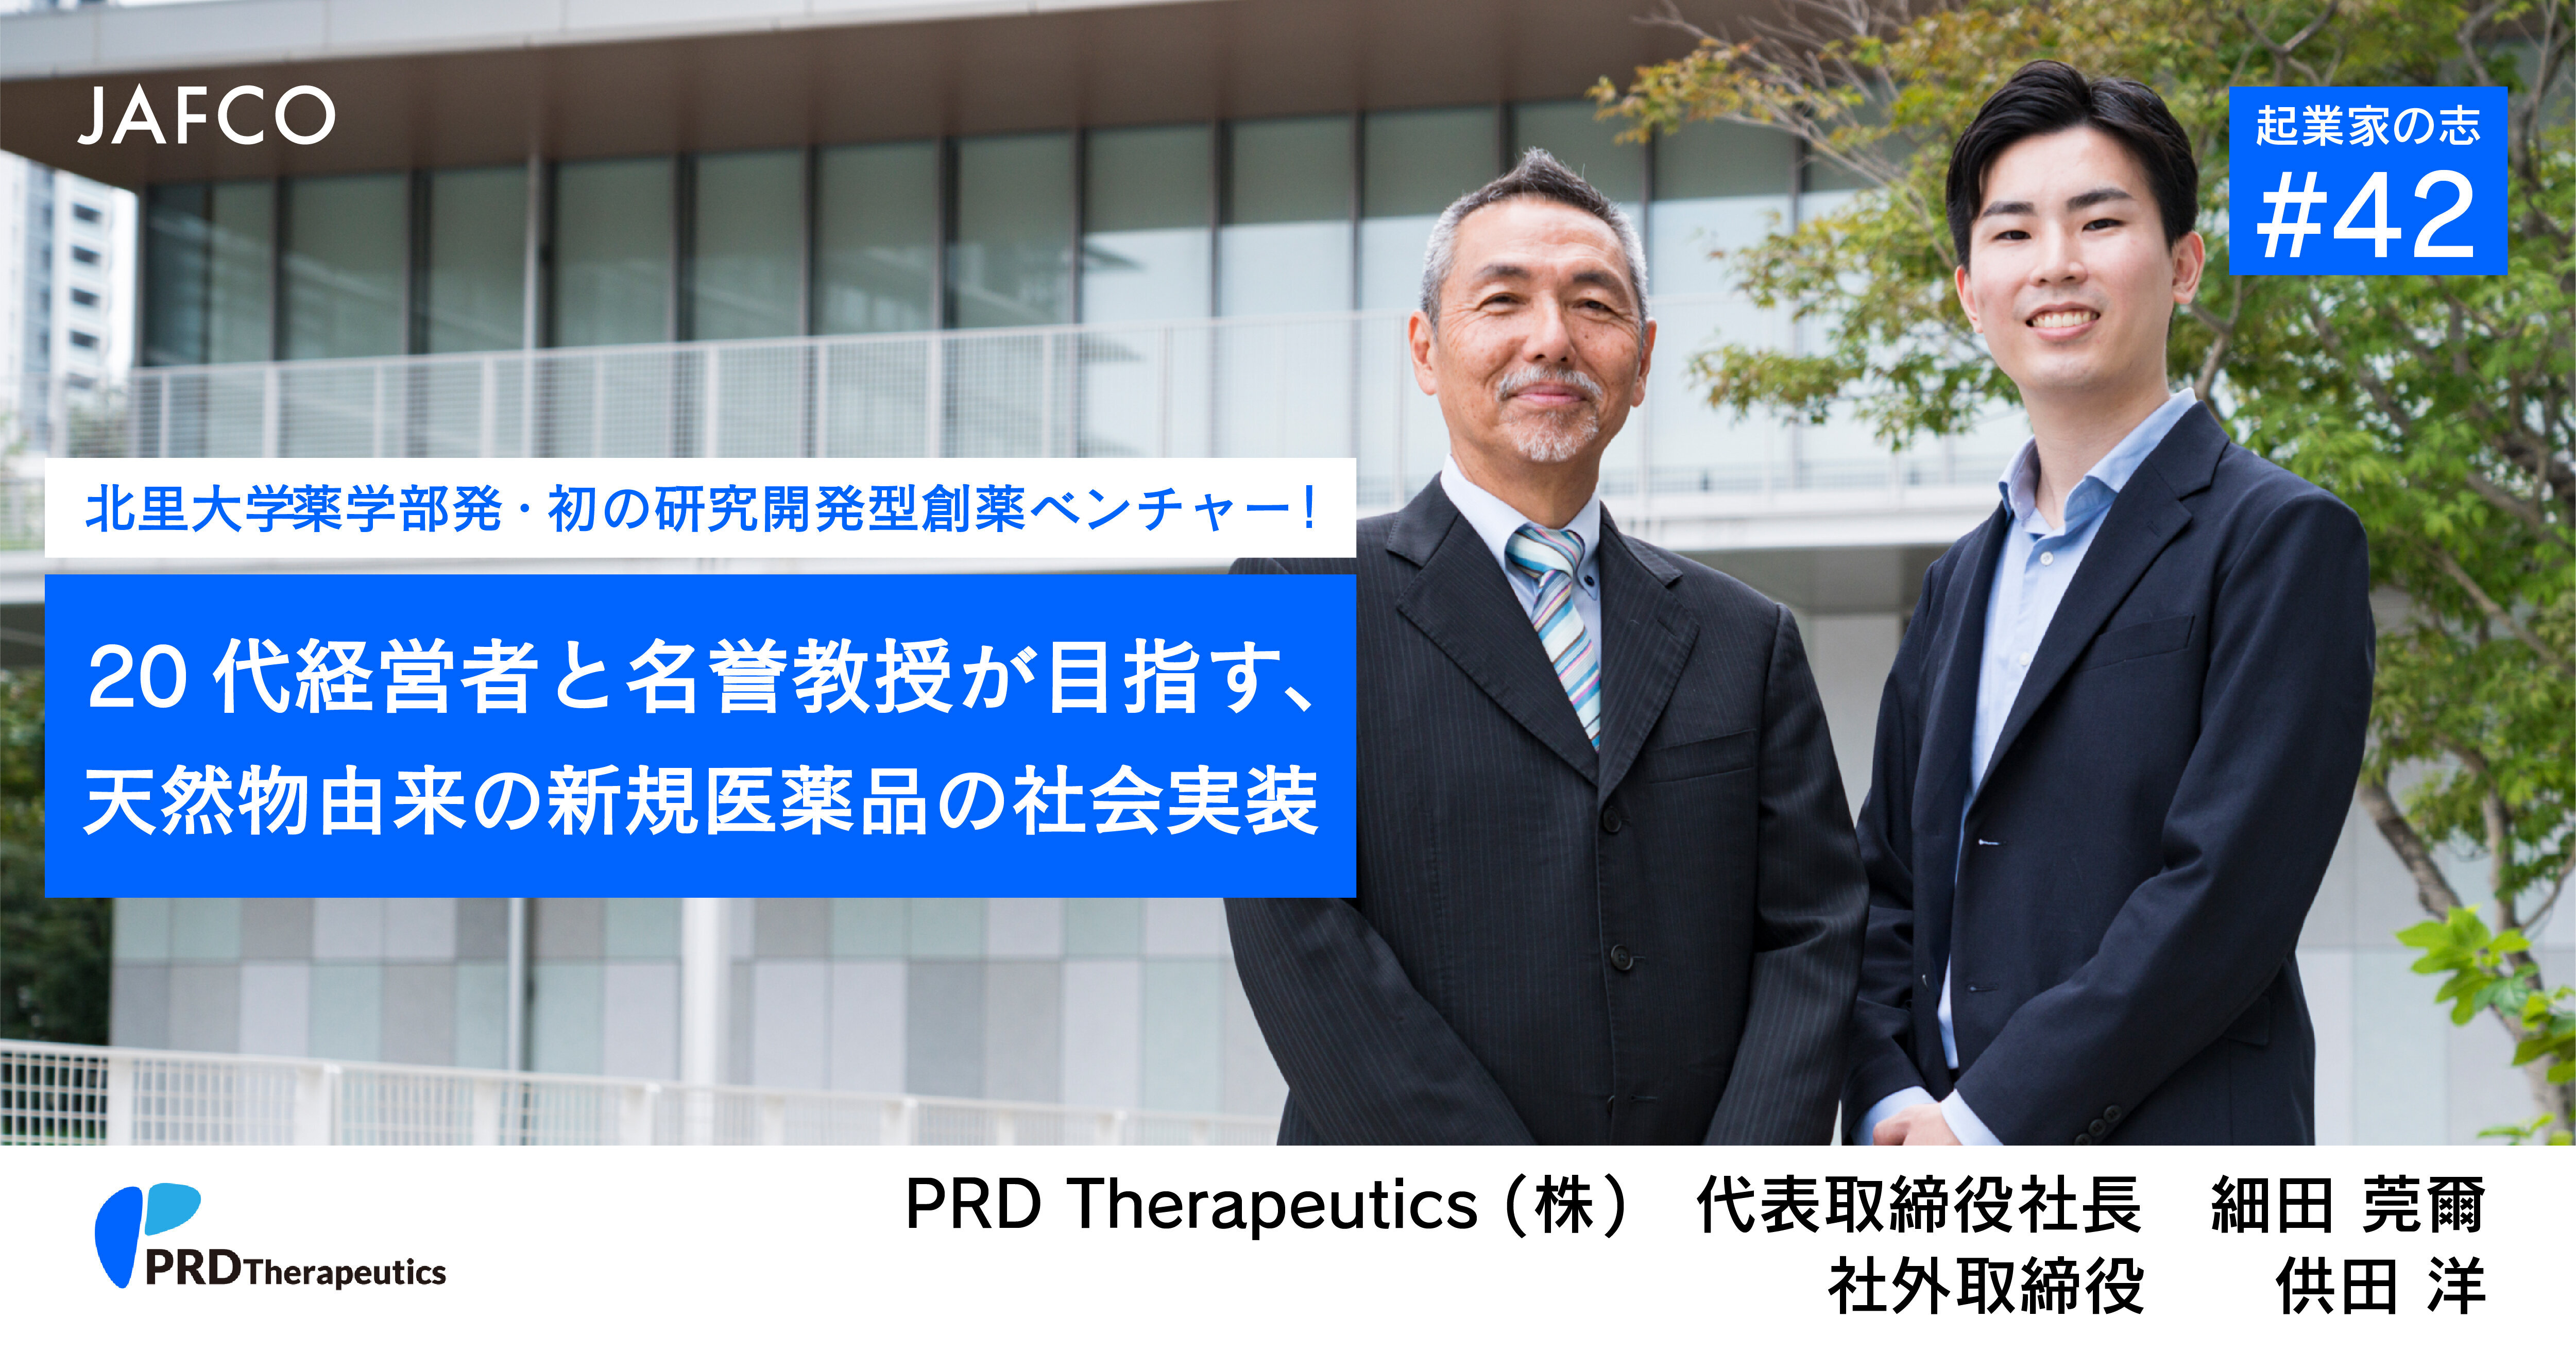 Kitasato University's First R&D Drug Venture: Young CEO and Honorary Professor Pursue New Naturally-Derived Drug